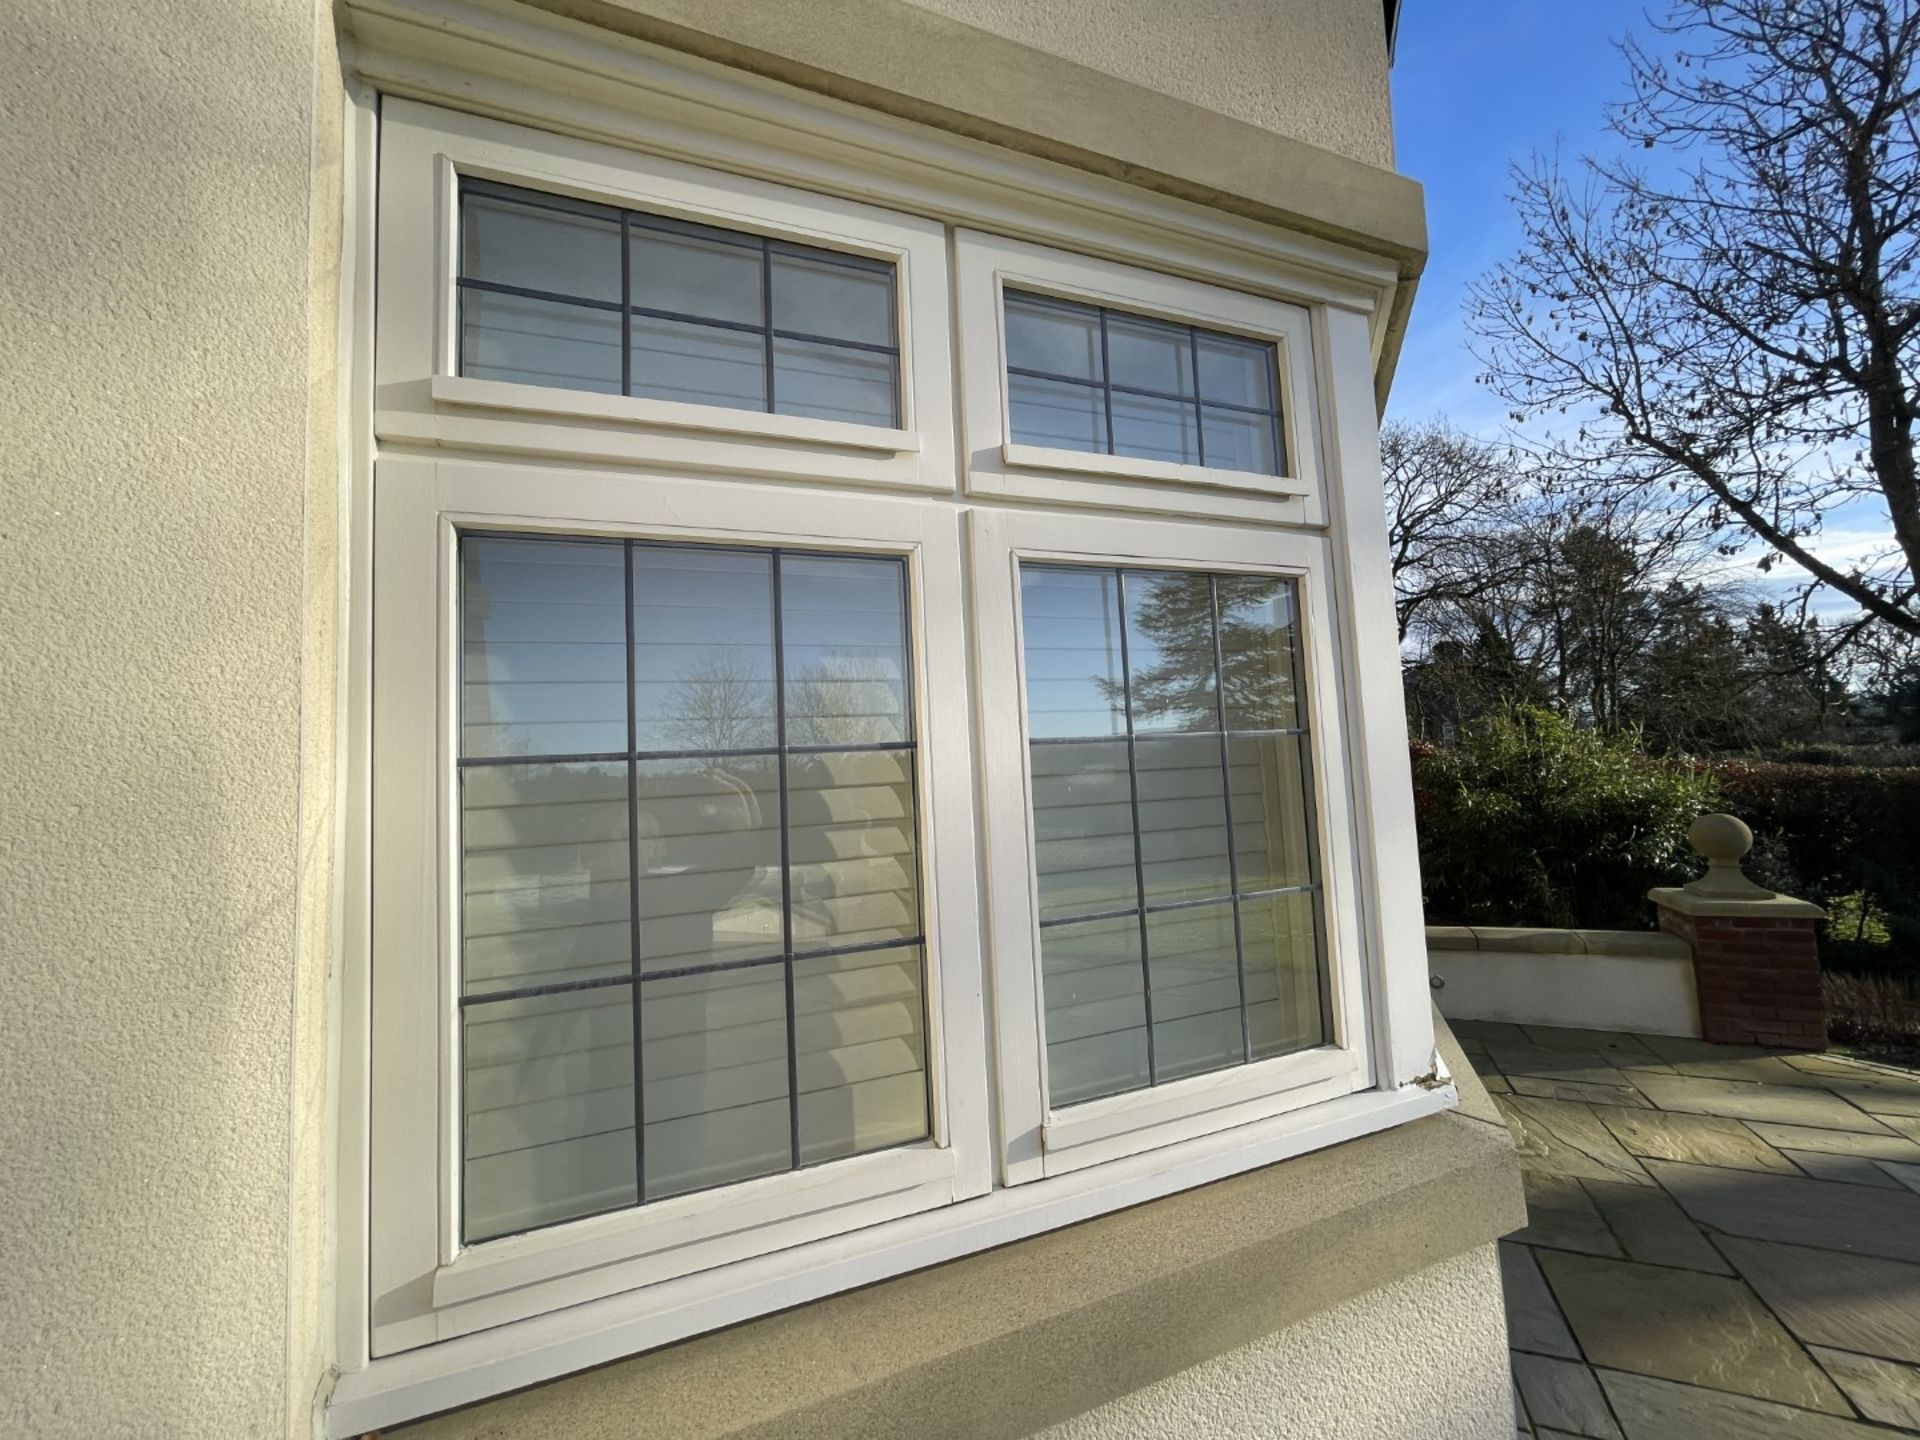 1 x Hardwood Timber Double Glazed Window Frames fitted with Shutter Blinds, In White - Ref: PAN102 - Image 12 of 13